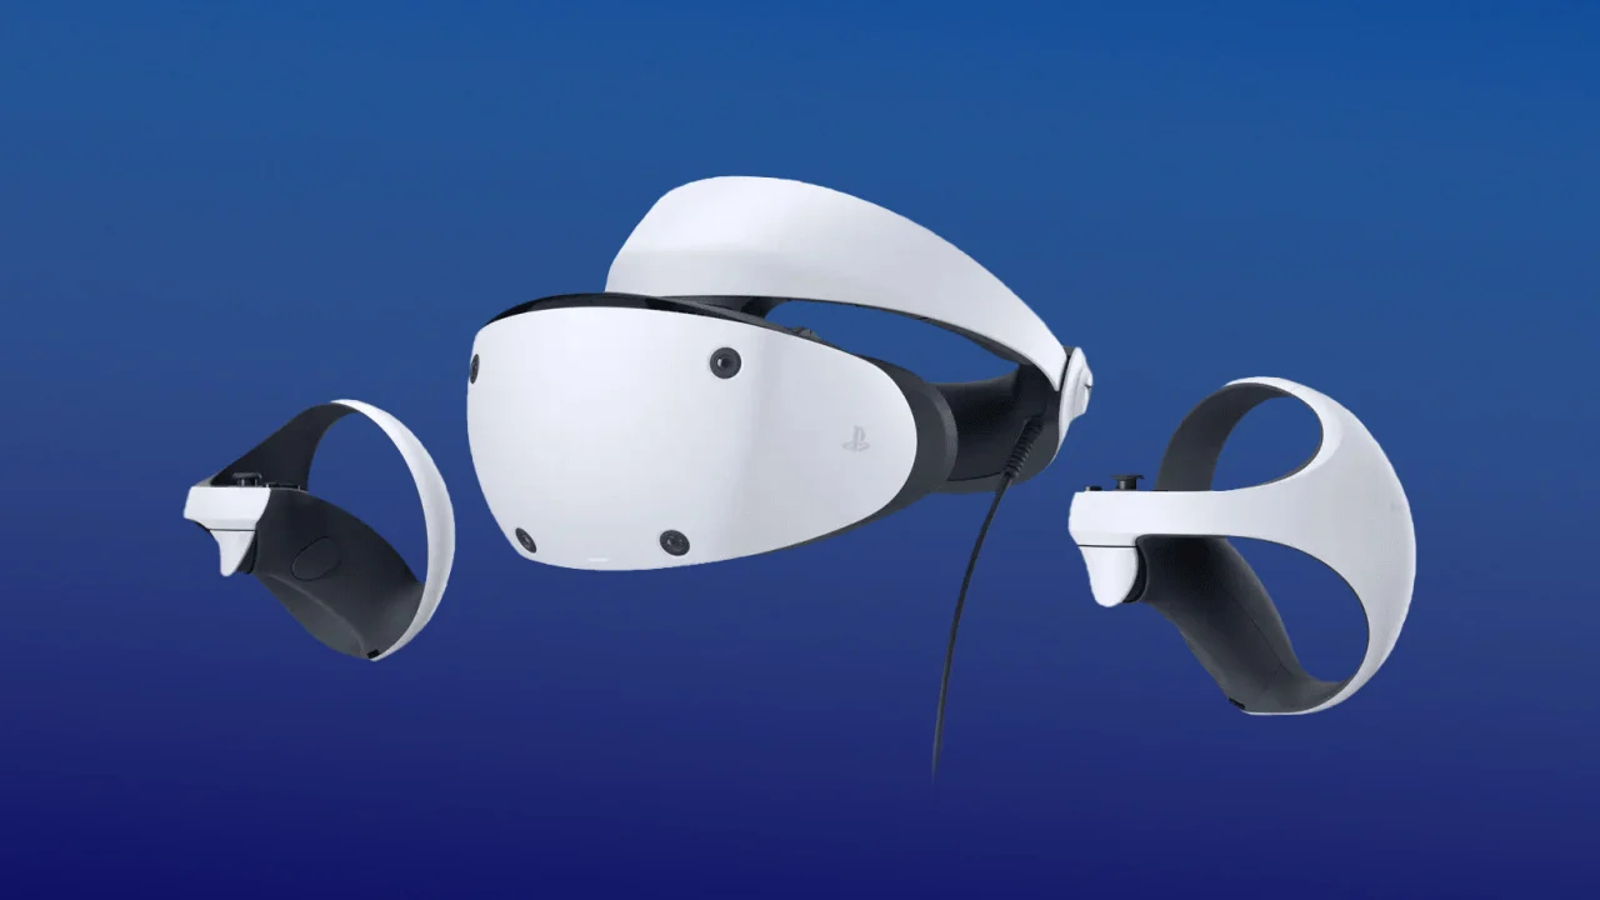 Sony launches PlayStation VR2 headset in India, and it's not cheap